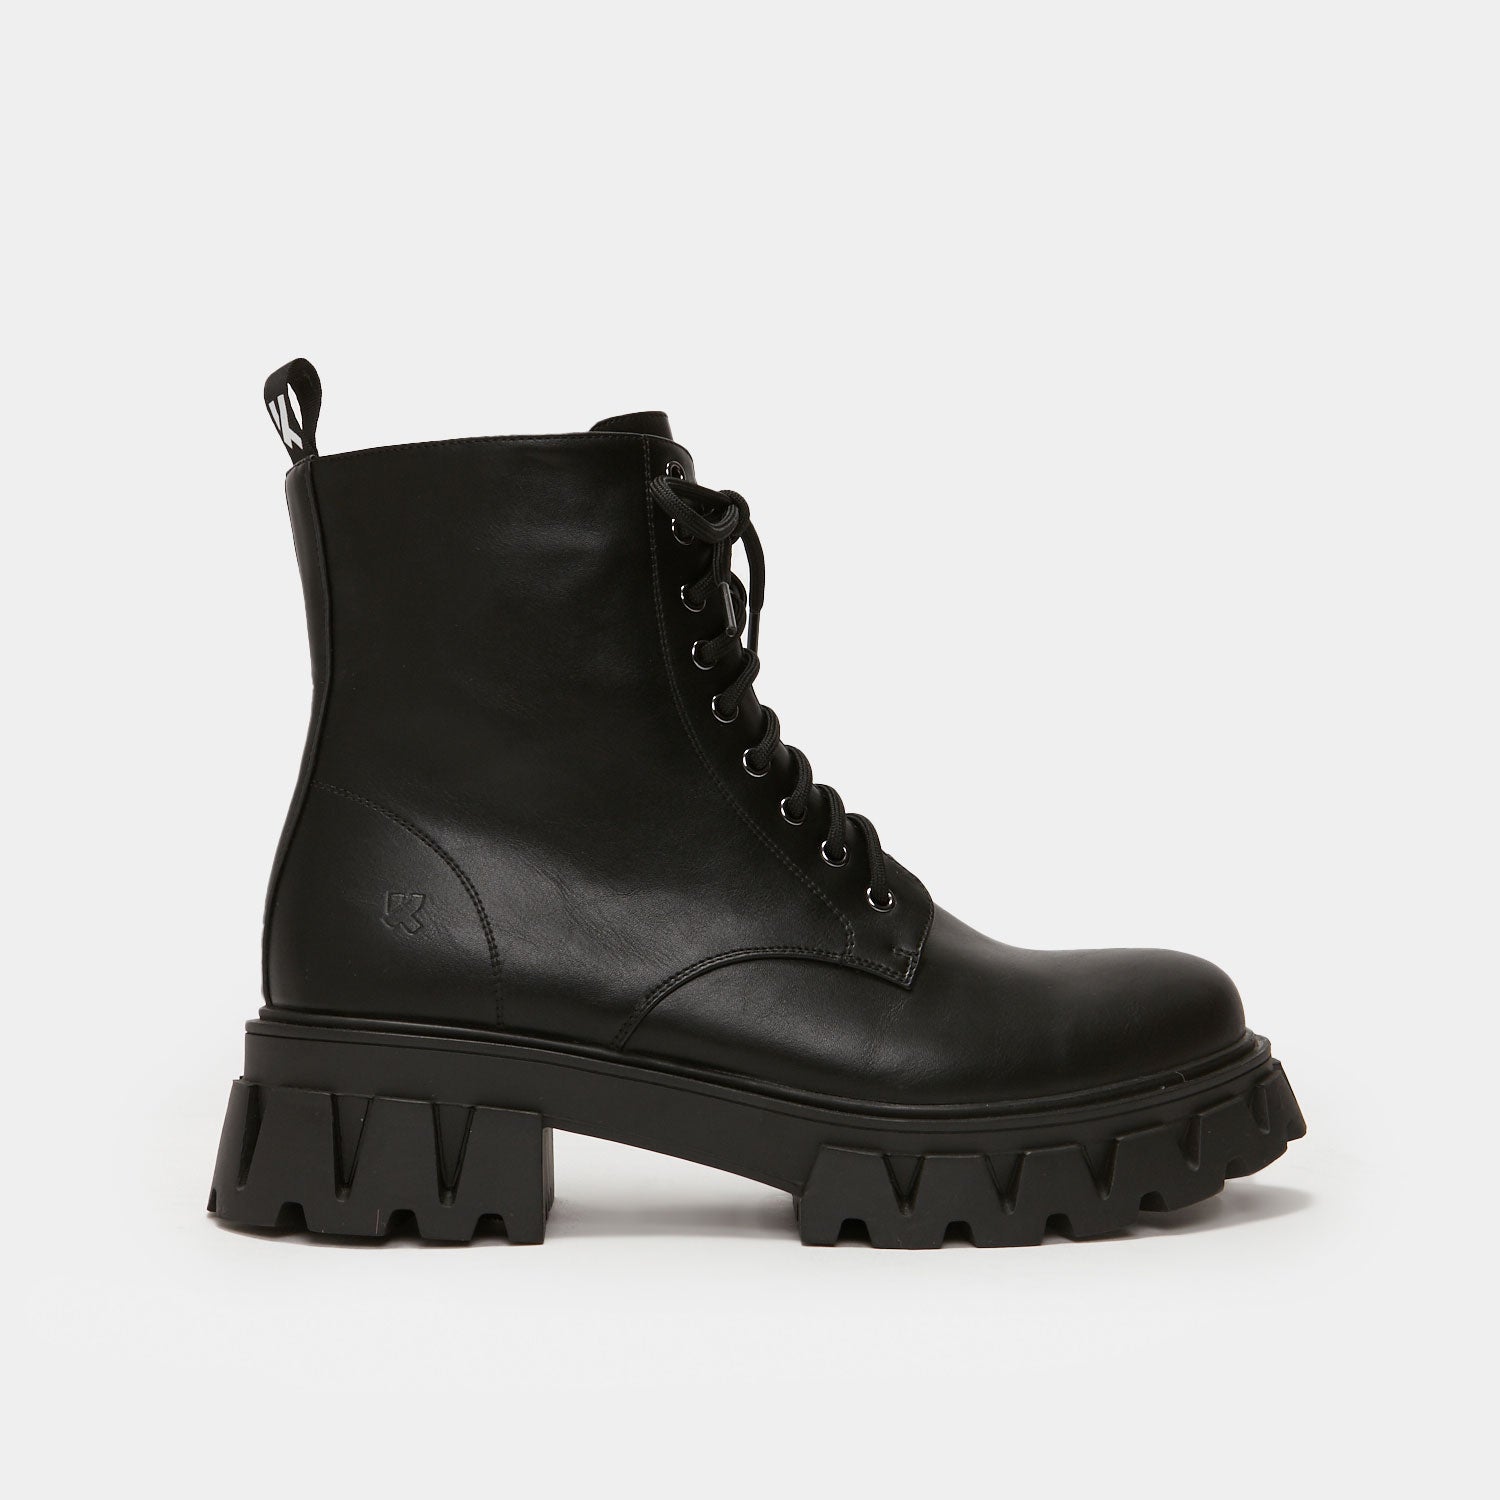 Muted Shadow Men's Lace Up Boots - Ankle Boots - KOI Footwear - Black - Side View